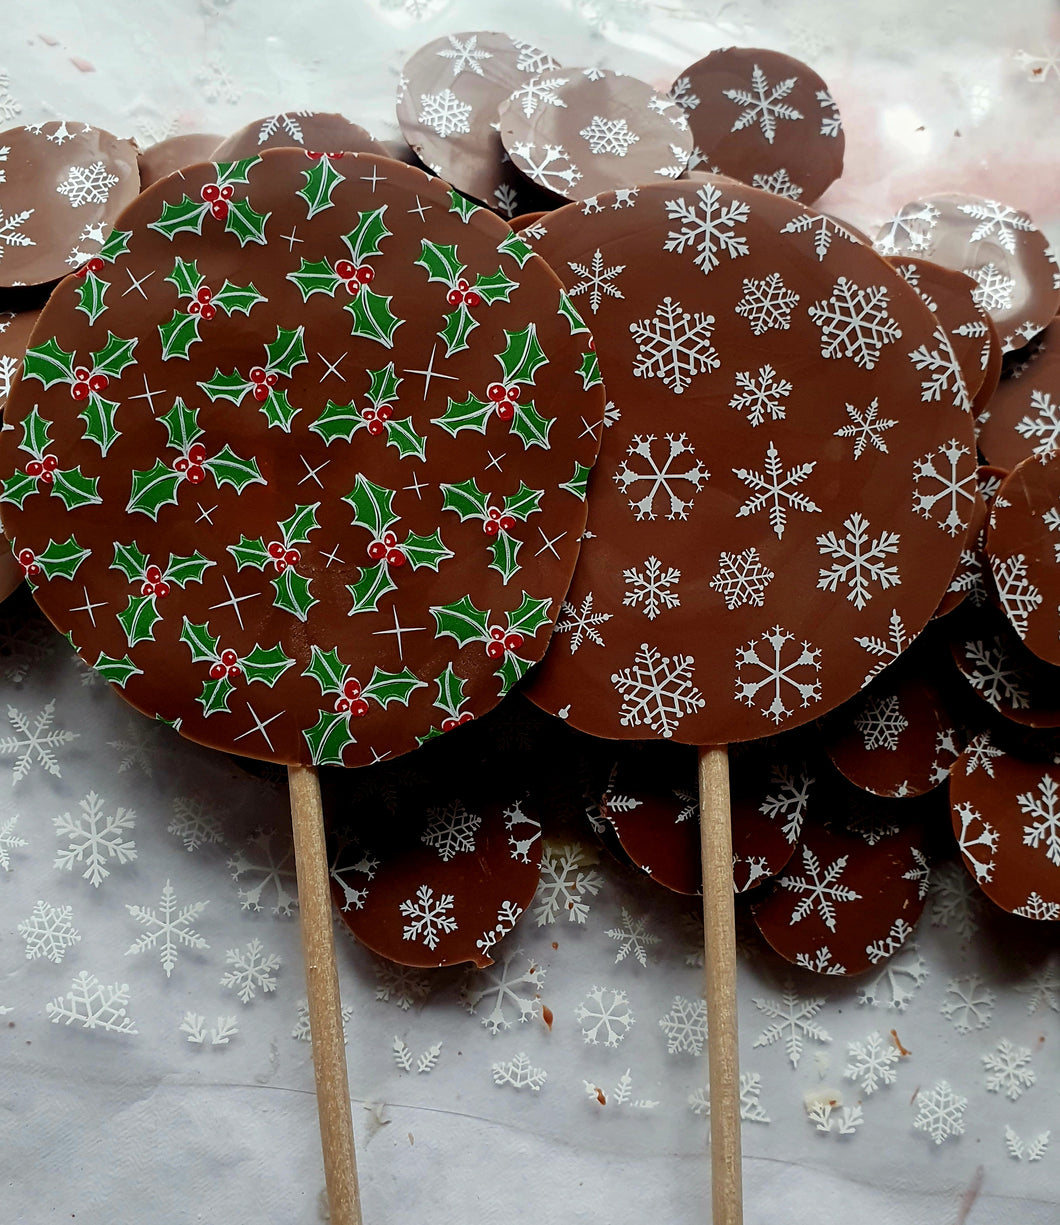 Snowflake lolly